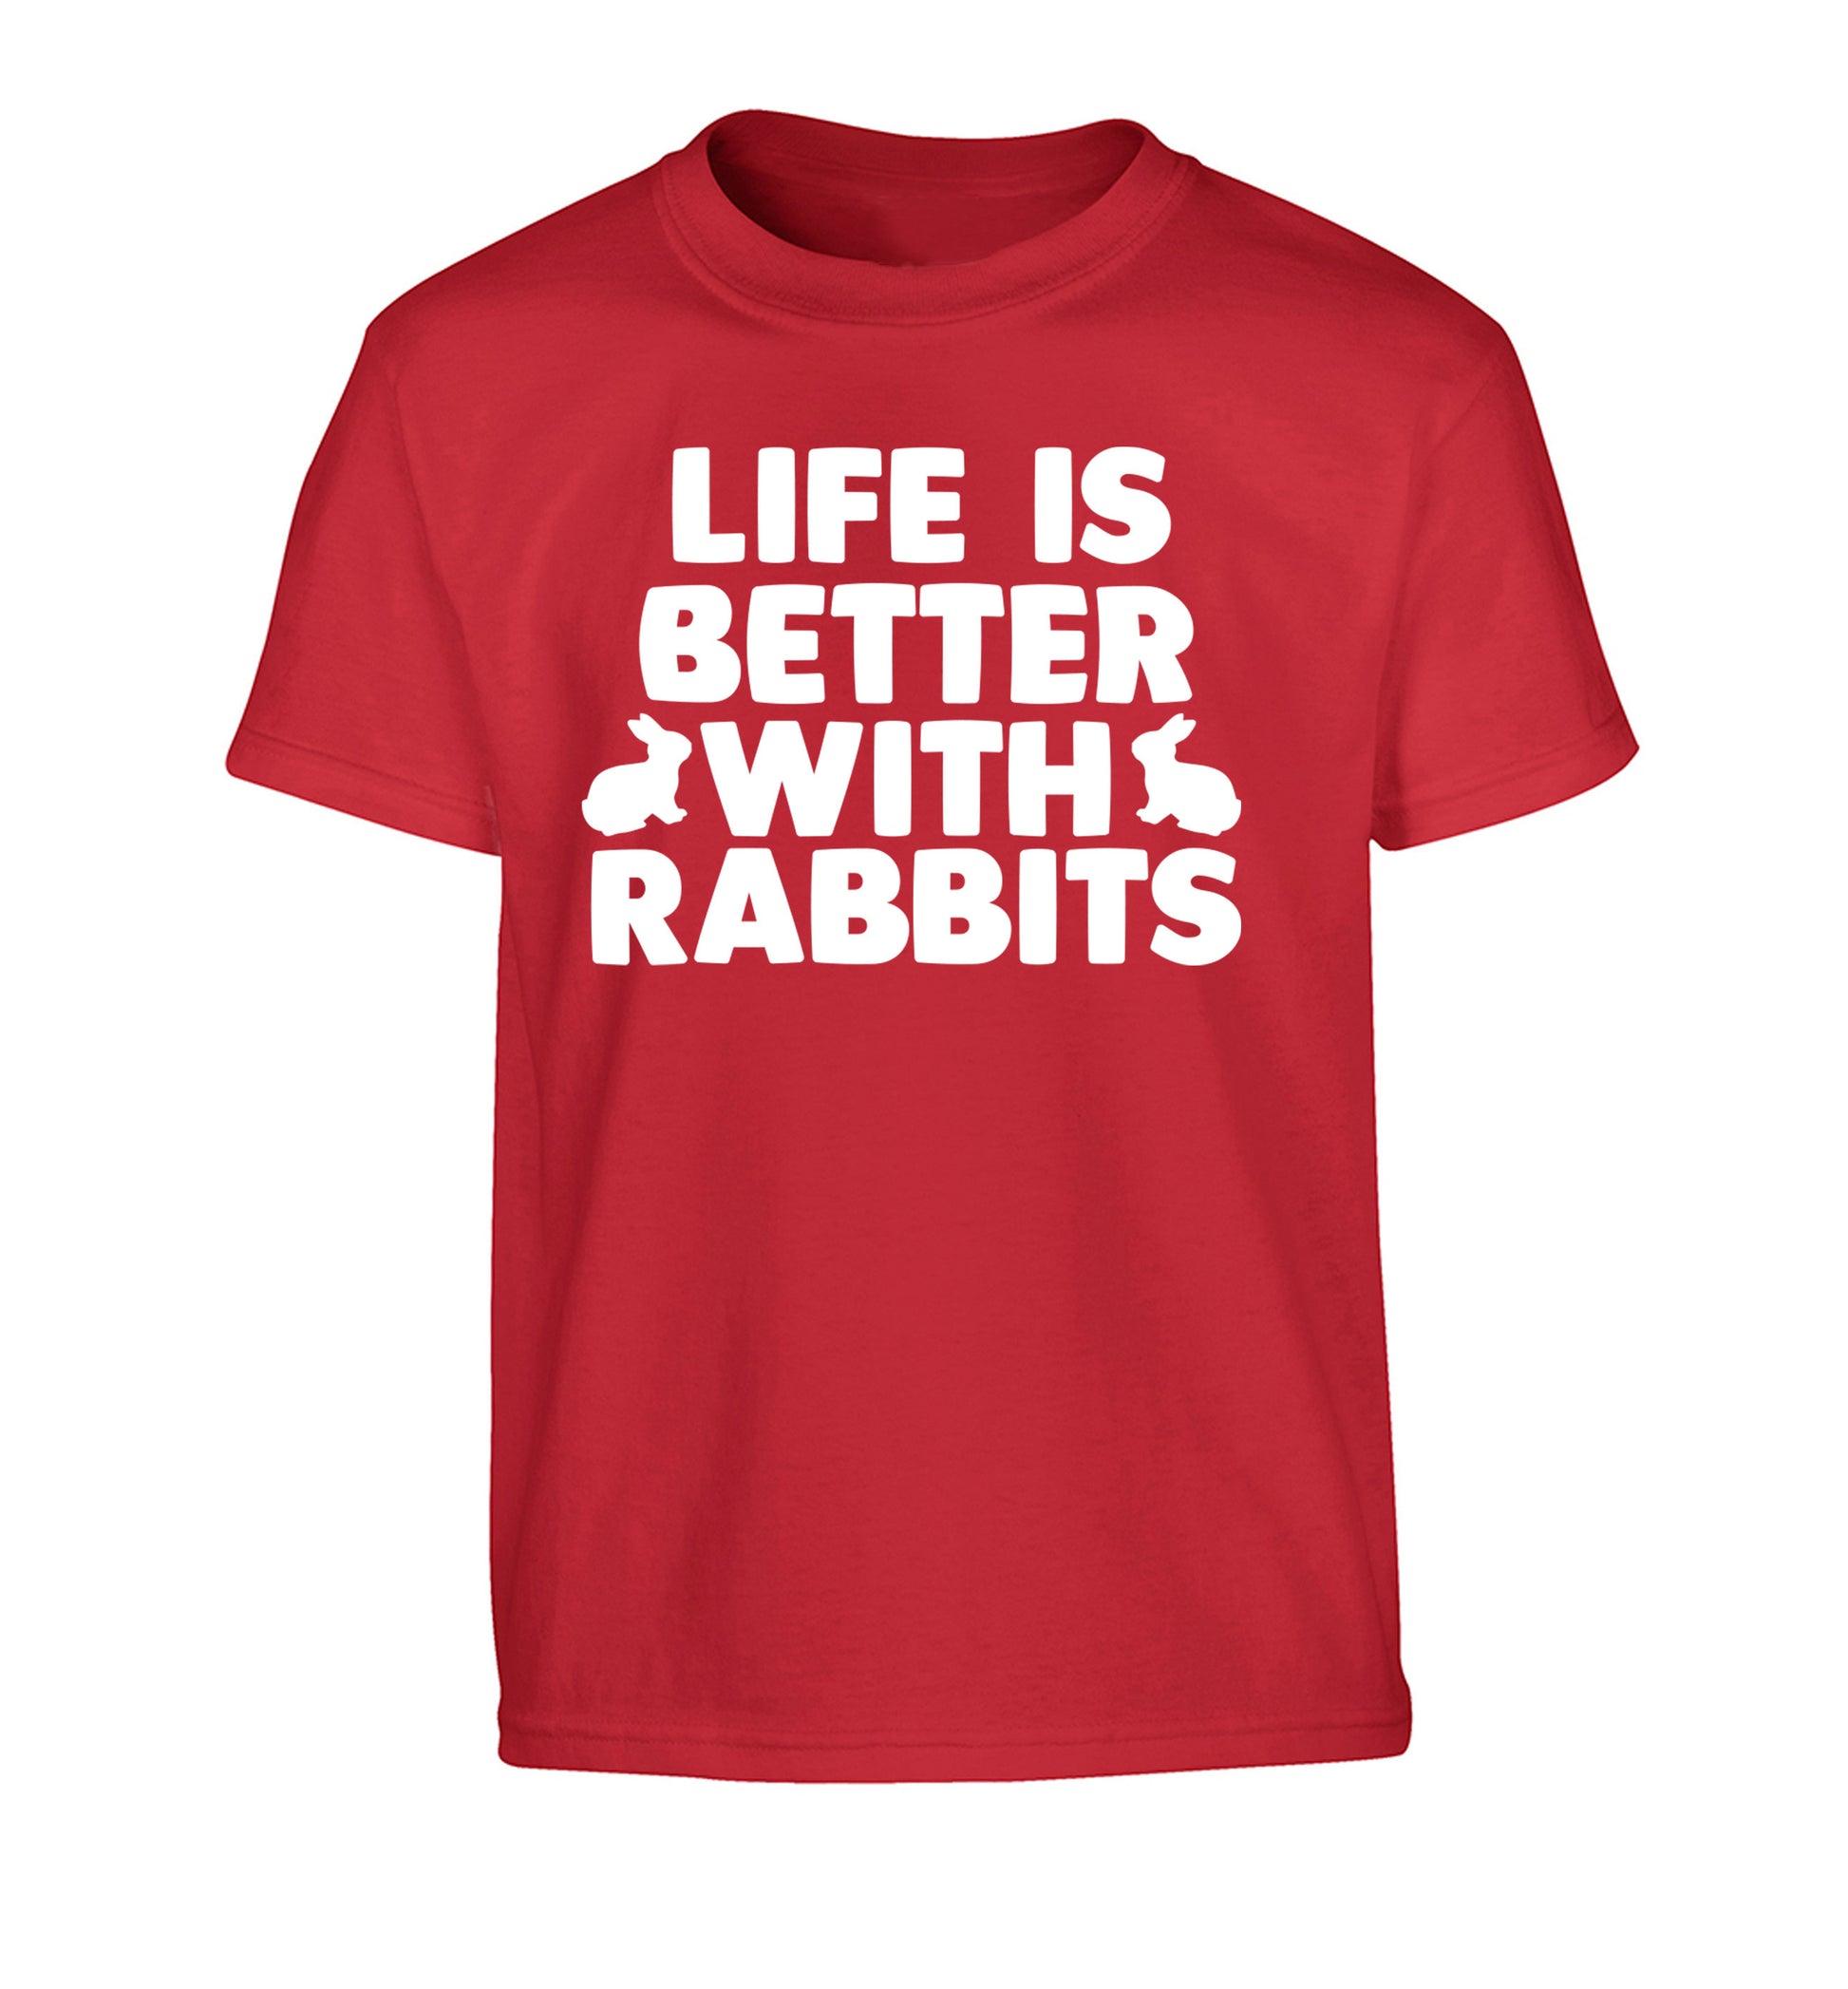 Life is better with rabbits Children's red Tshirt 12-14 Years